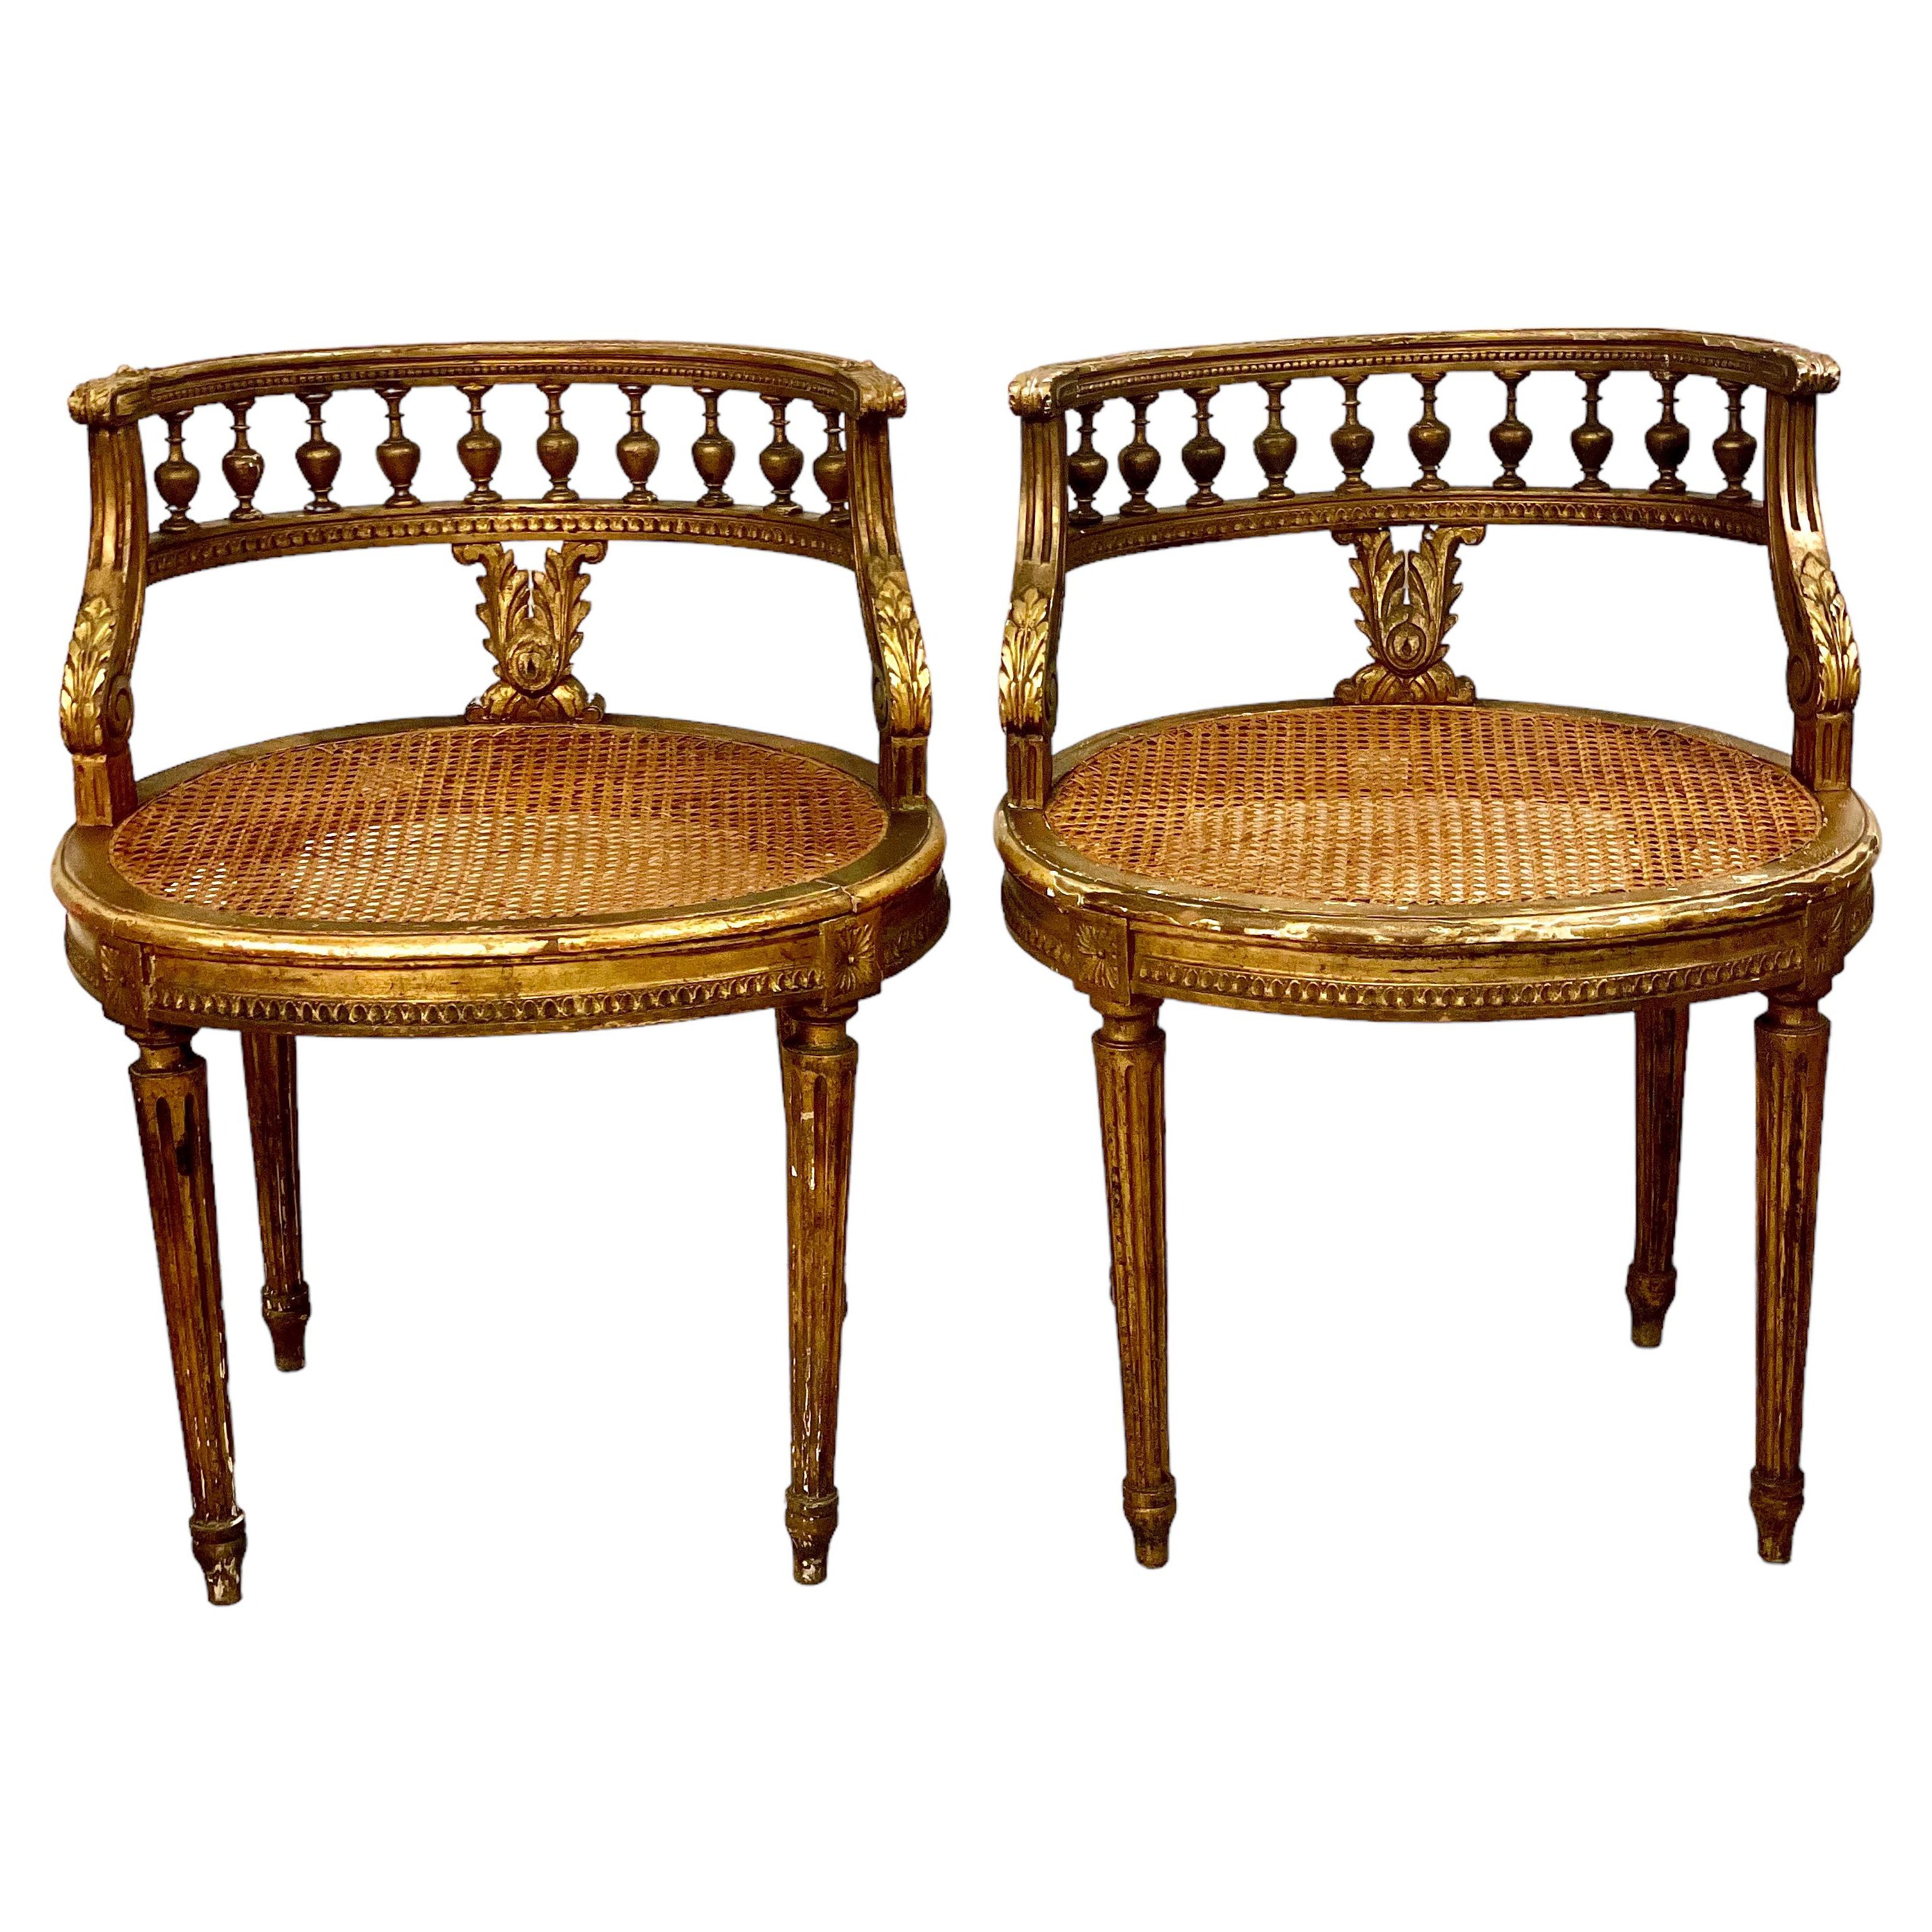 Pair of Antique French Louis XVI Gilt Caned Chairs 